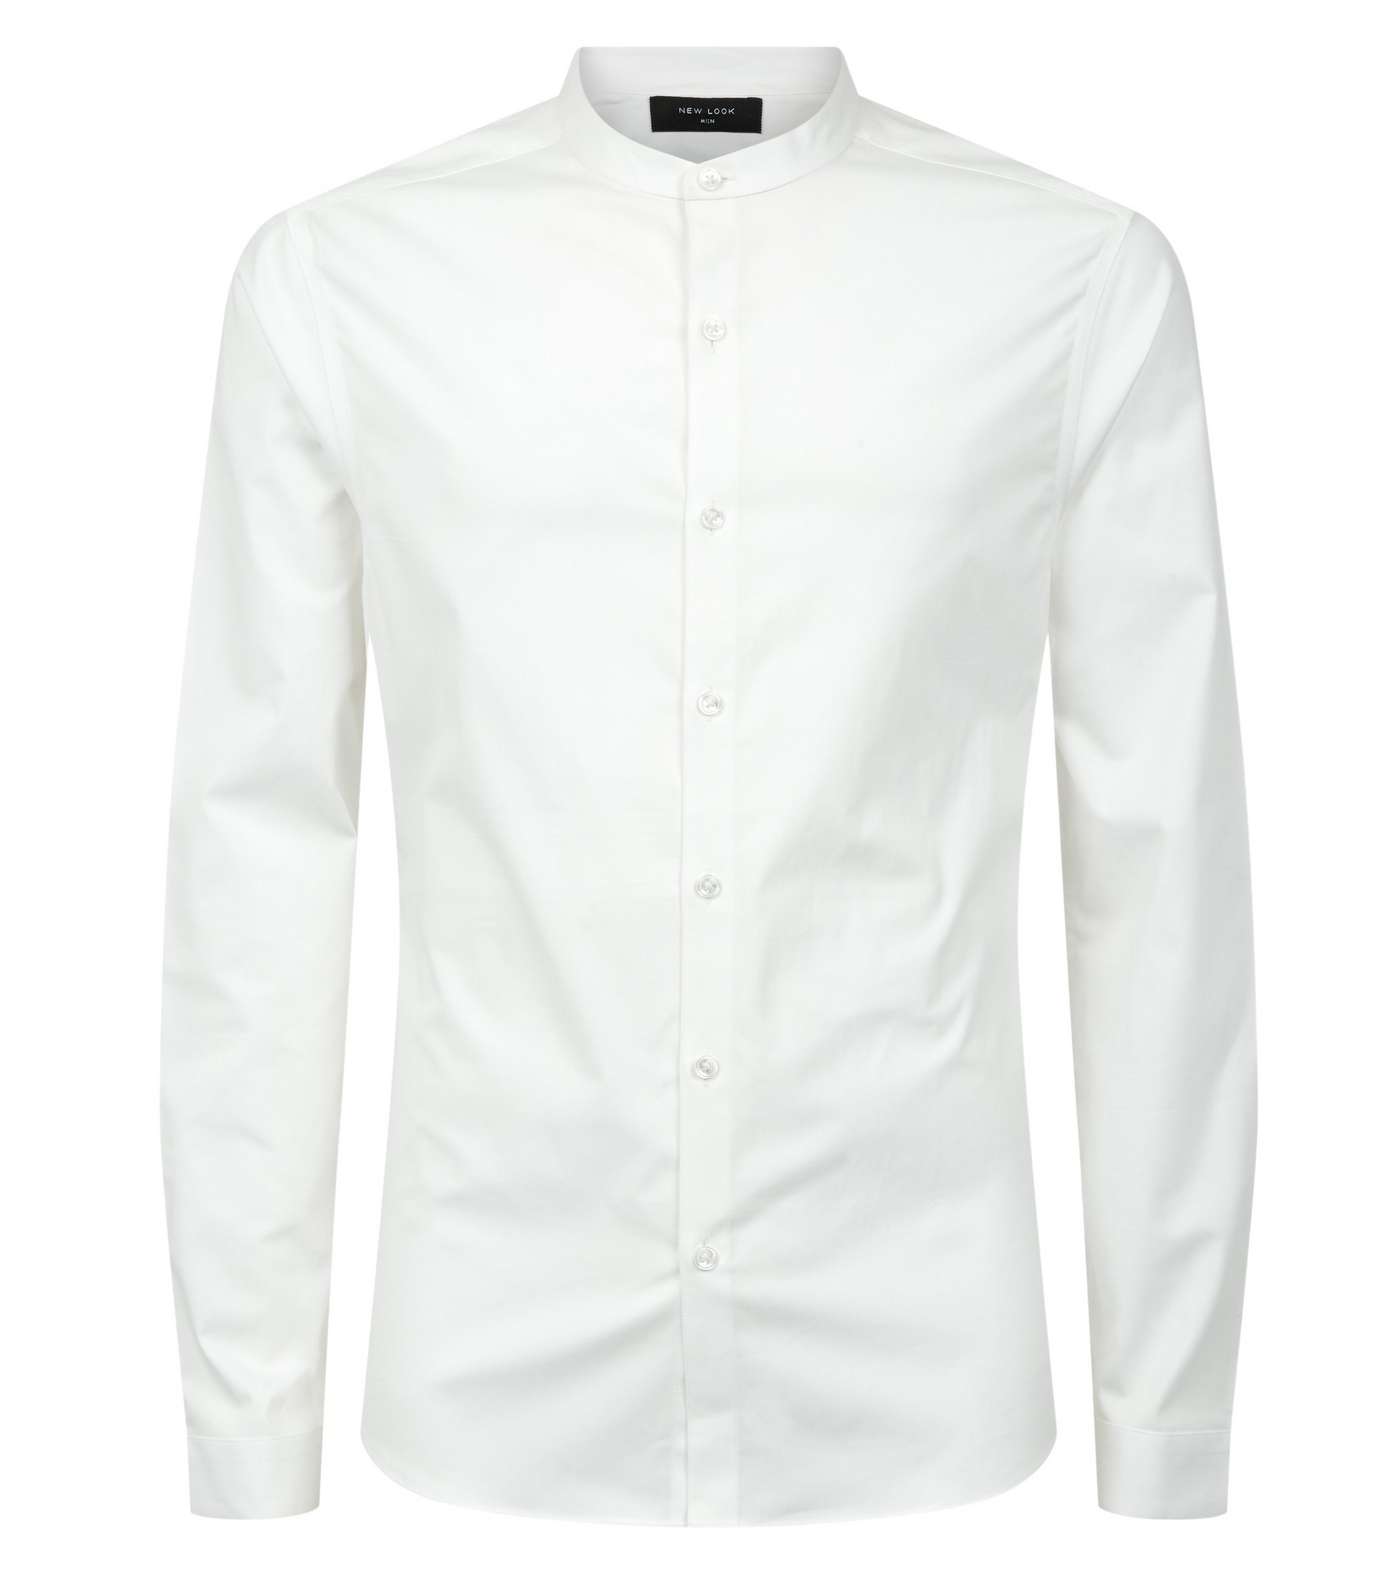 White Muscle Fit Grandad Oxford Shirt Image 4